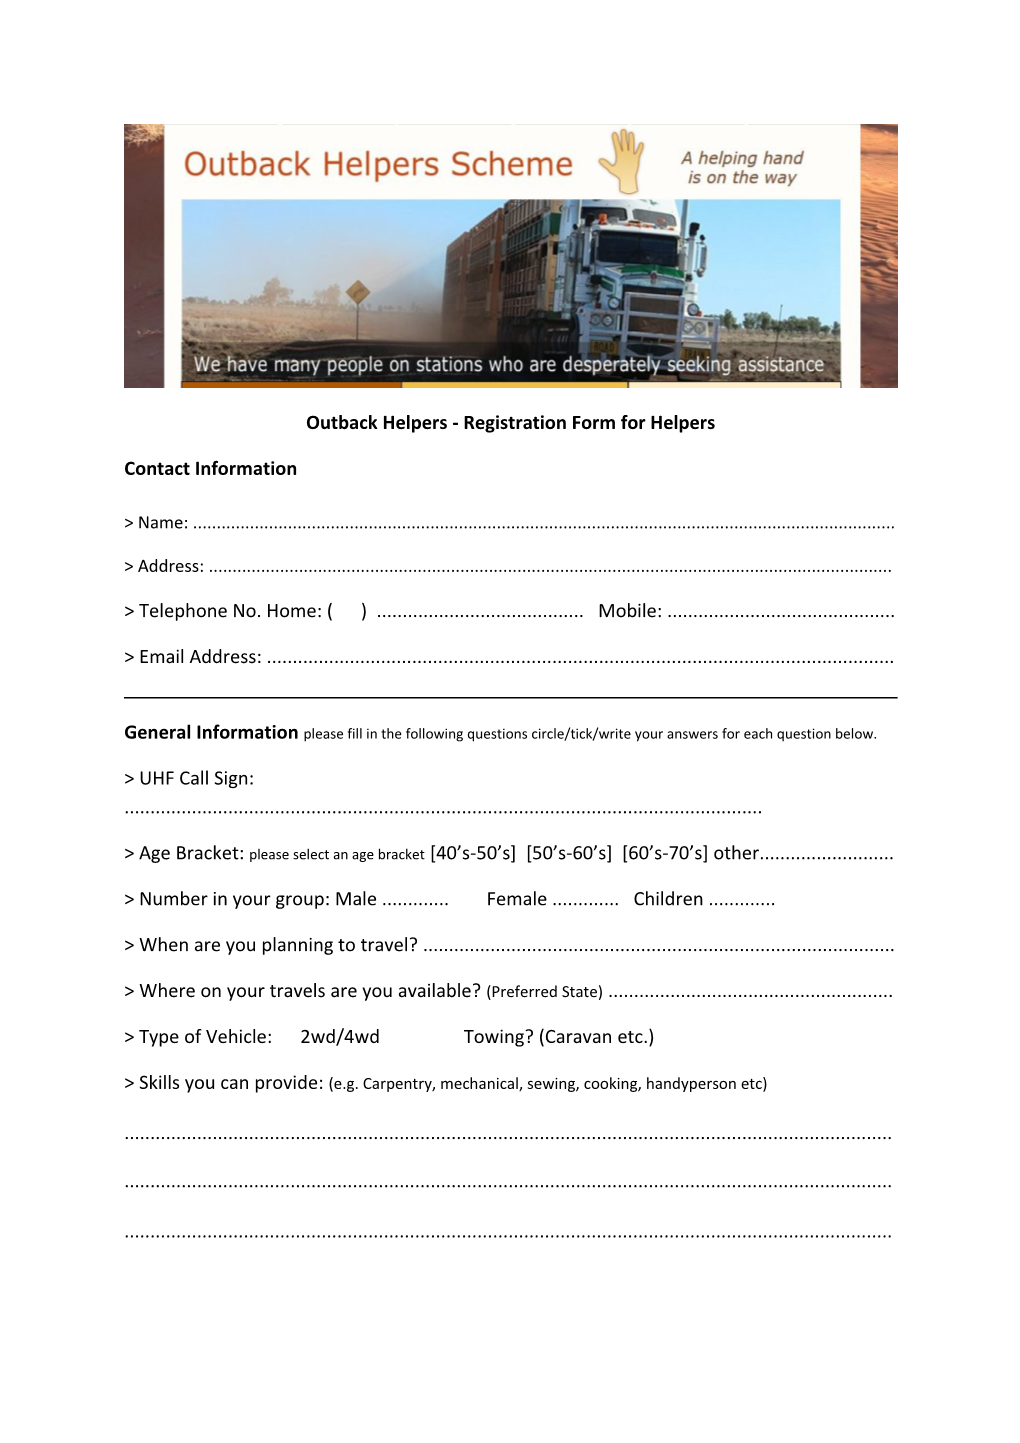 Outback Helpers - Registration Form for Helpers